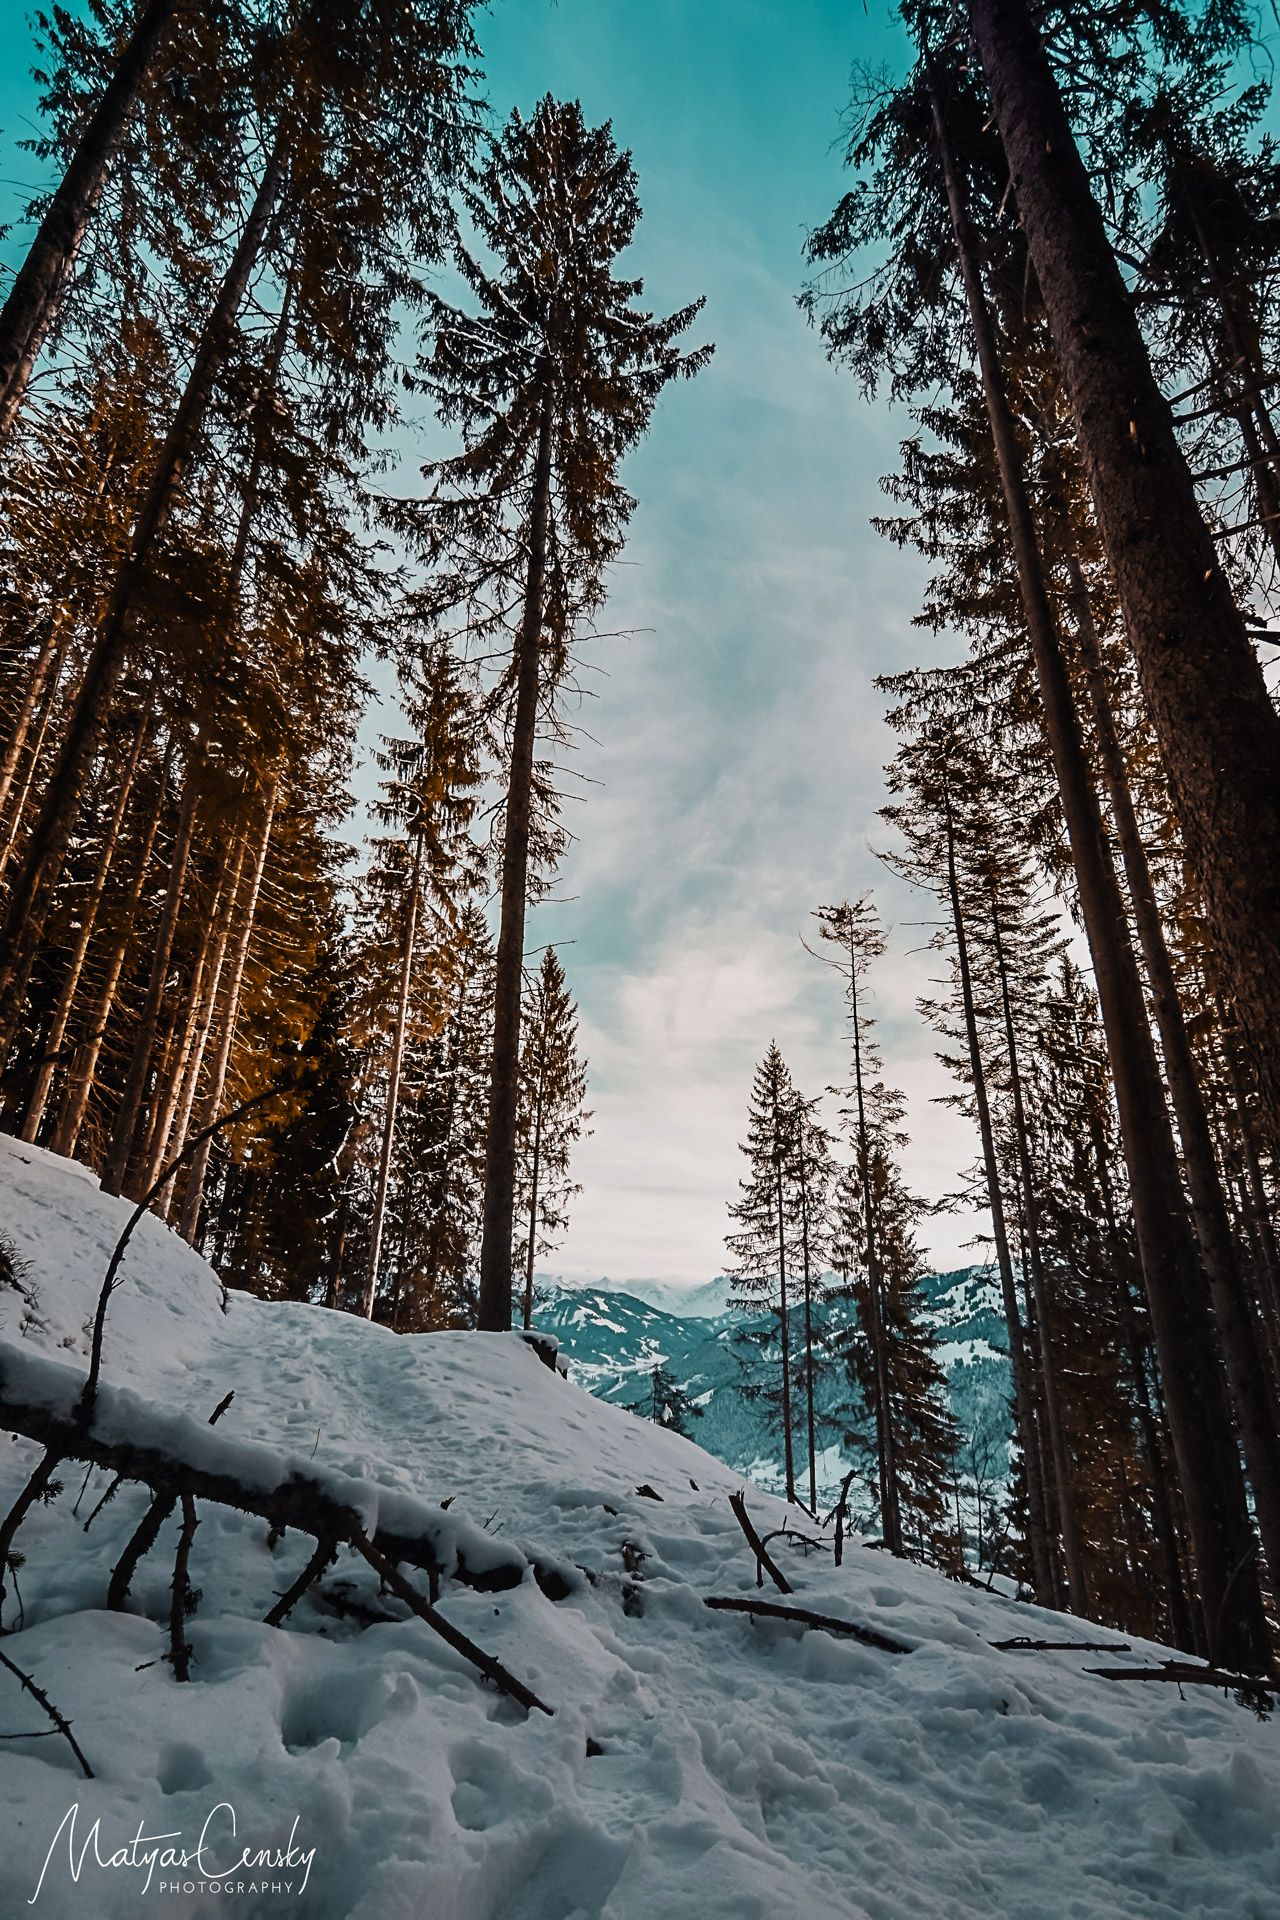 Landscape photo of winter trail in forest with snow, fallen tree over the trail and snowy mountains in the back, taken in Kitzbuehel, Austria.